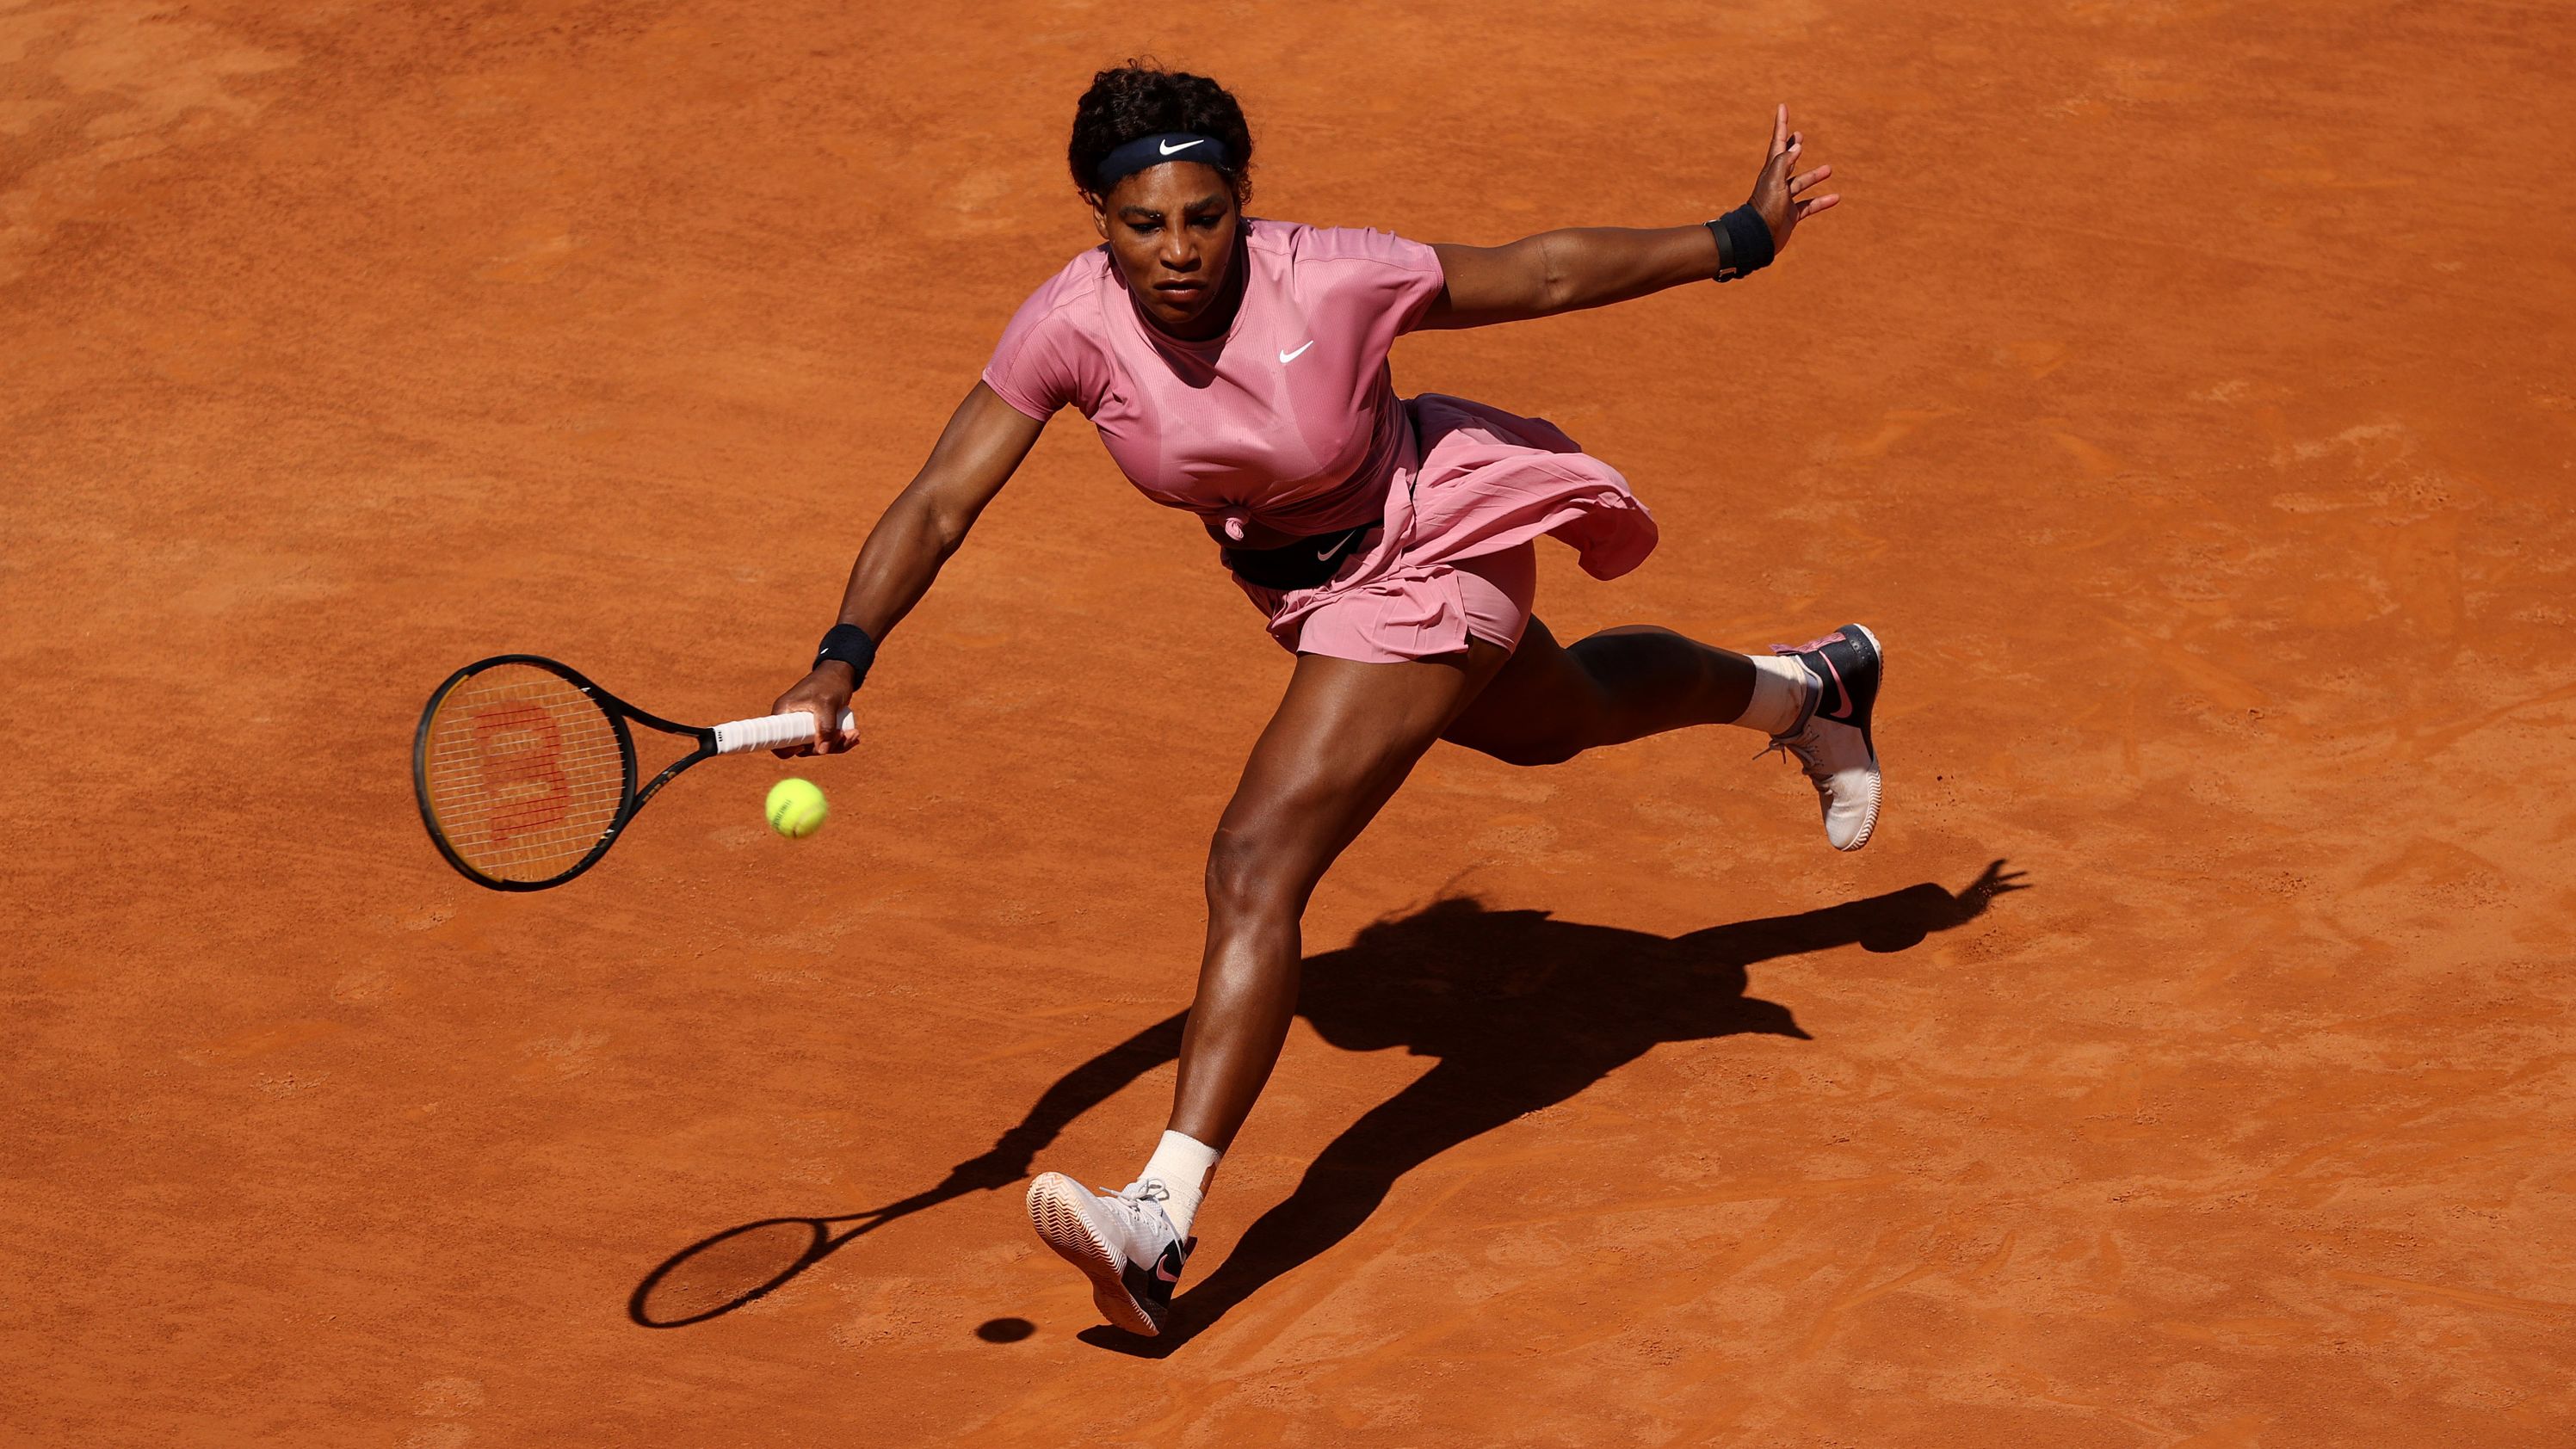 Serena Williams, though she's considered one of the GOATs among all athletes, has been routinely criticized throughout her career, often in racist ways. 